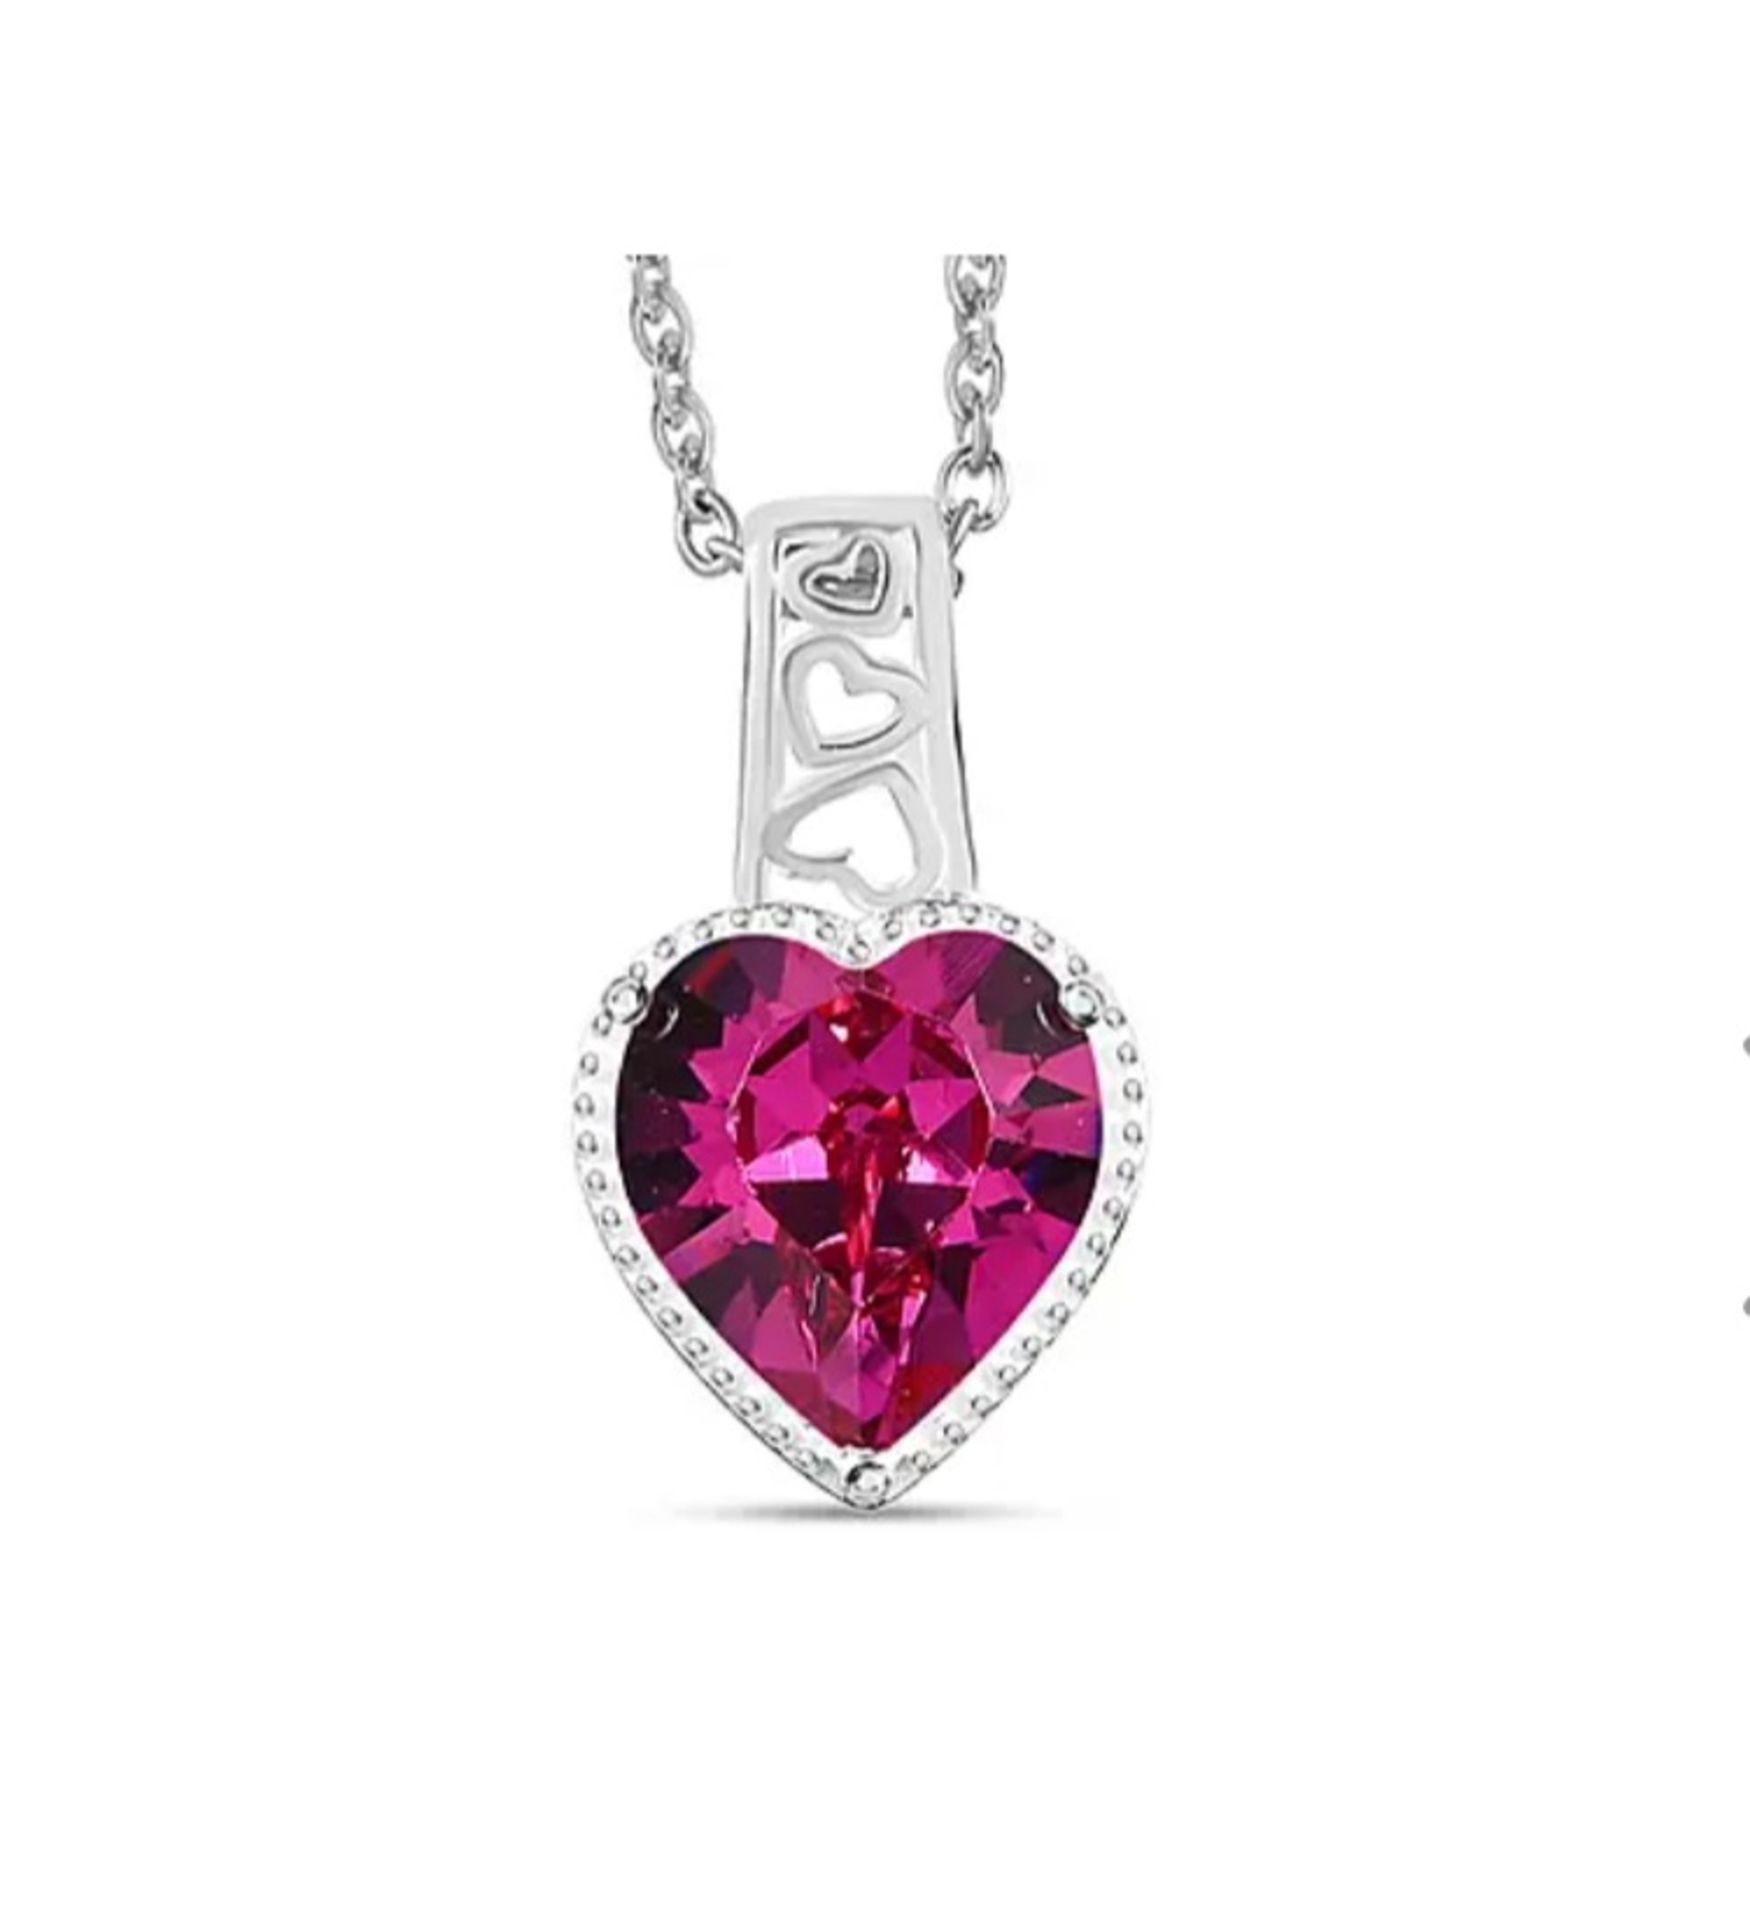 NEW! Fuchsia Austrian Crystal in Sterling Silver - Image 3 of 5